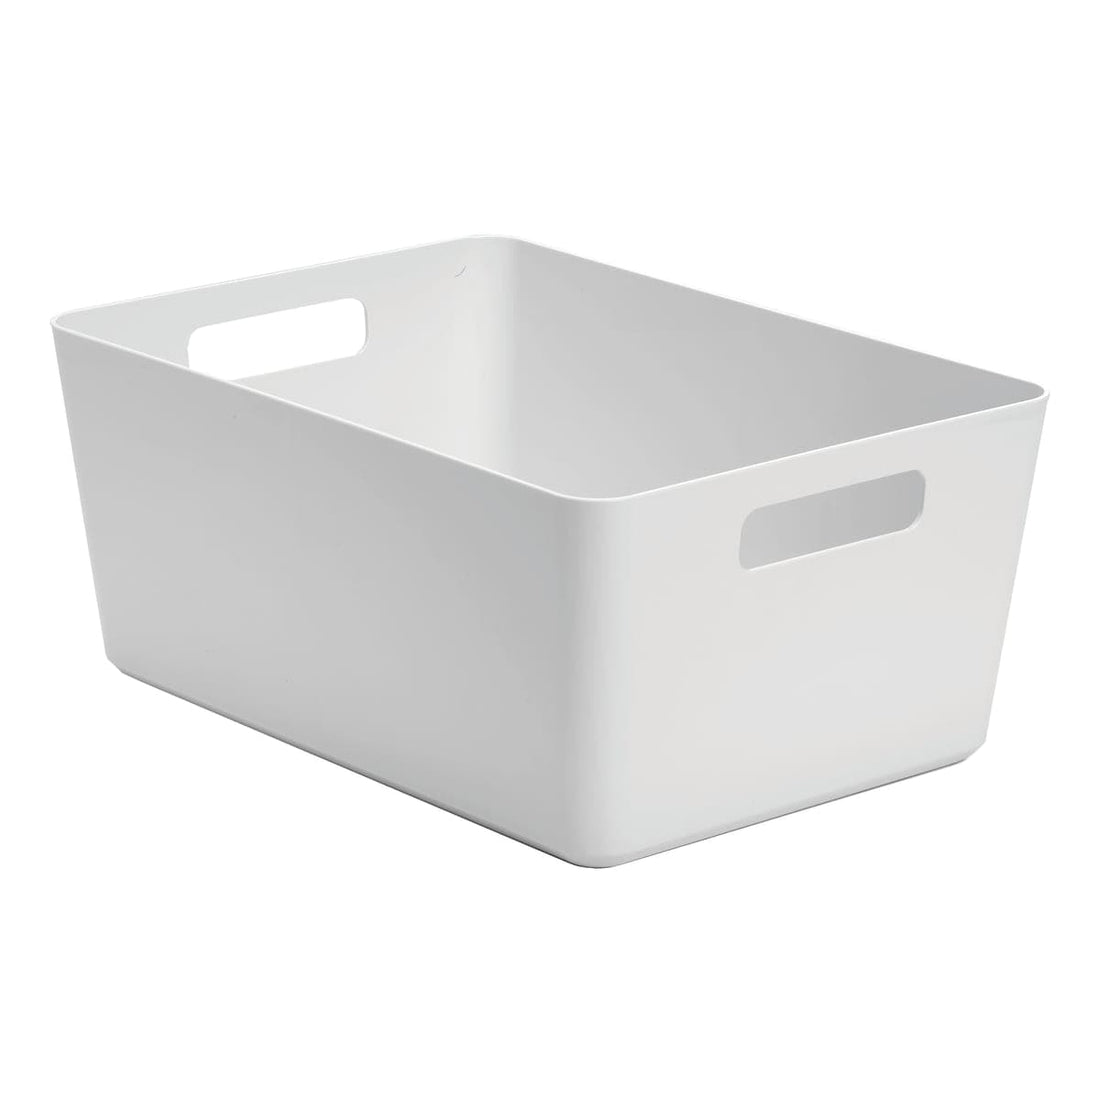 CONTAINER WITH LID R-BOX1 LARGE WHITE 33X24X14 CM - best price from Maltashopper.com BR410006634